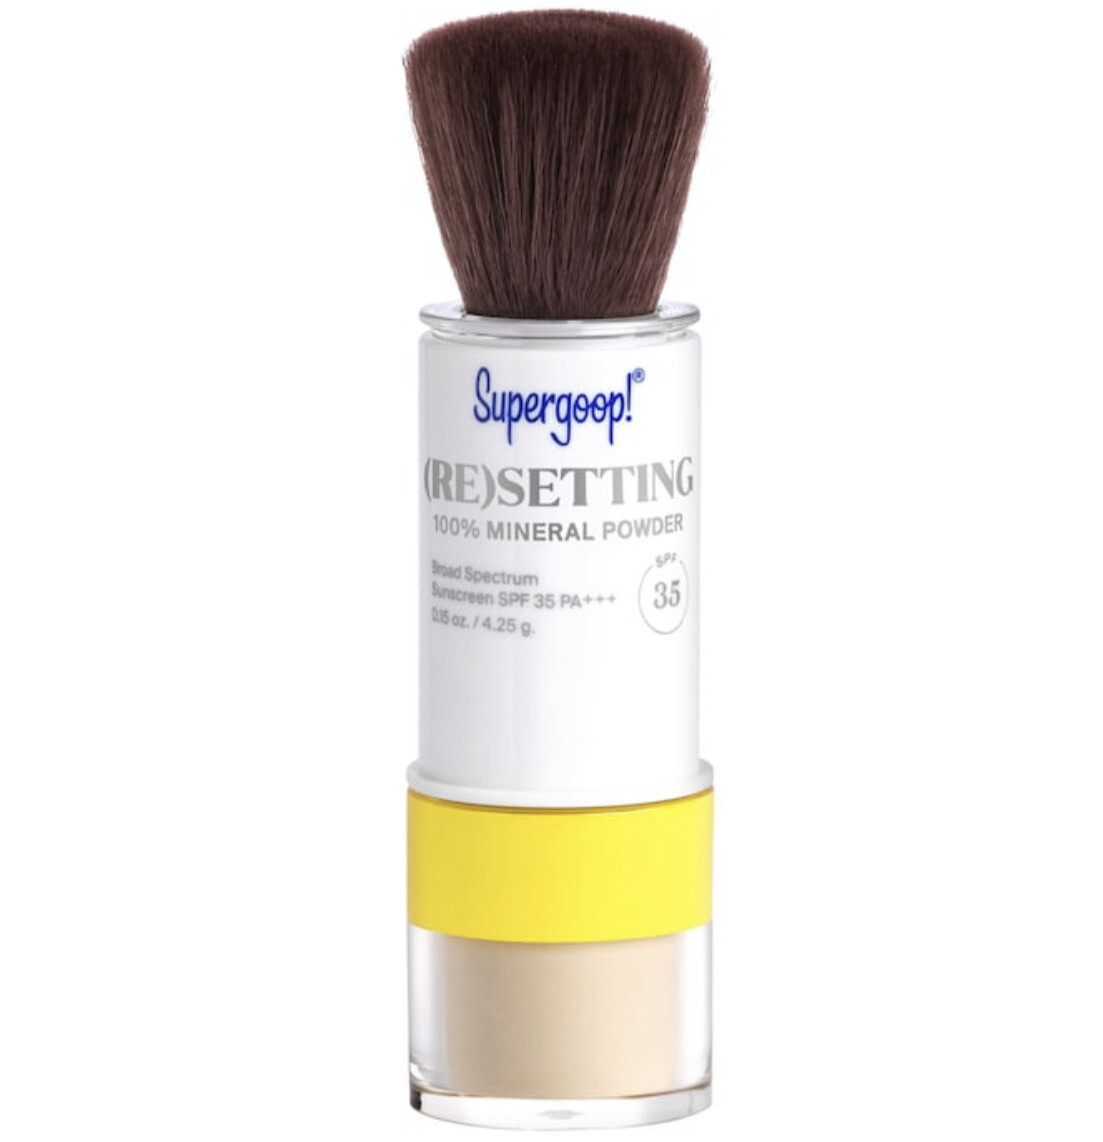 Supergoop! - (Re)setting 100% Mineral Powder Sunscreen SPF 35 PA+++ | Translucent